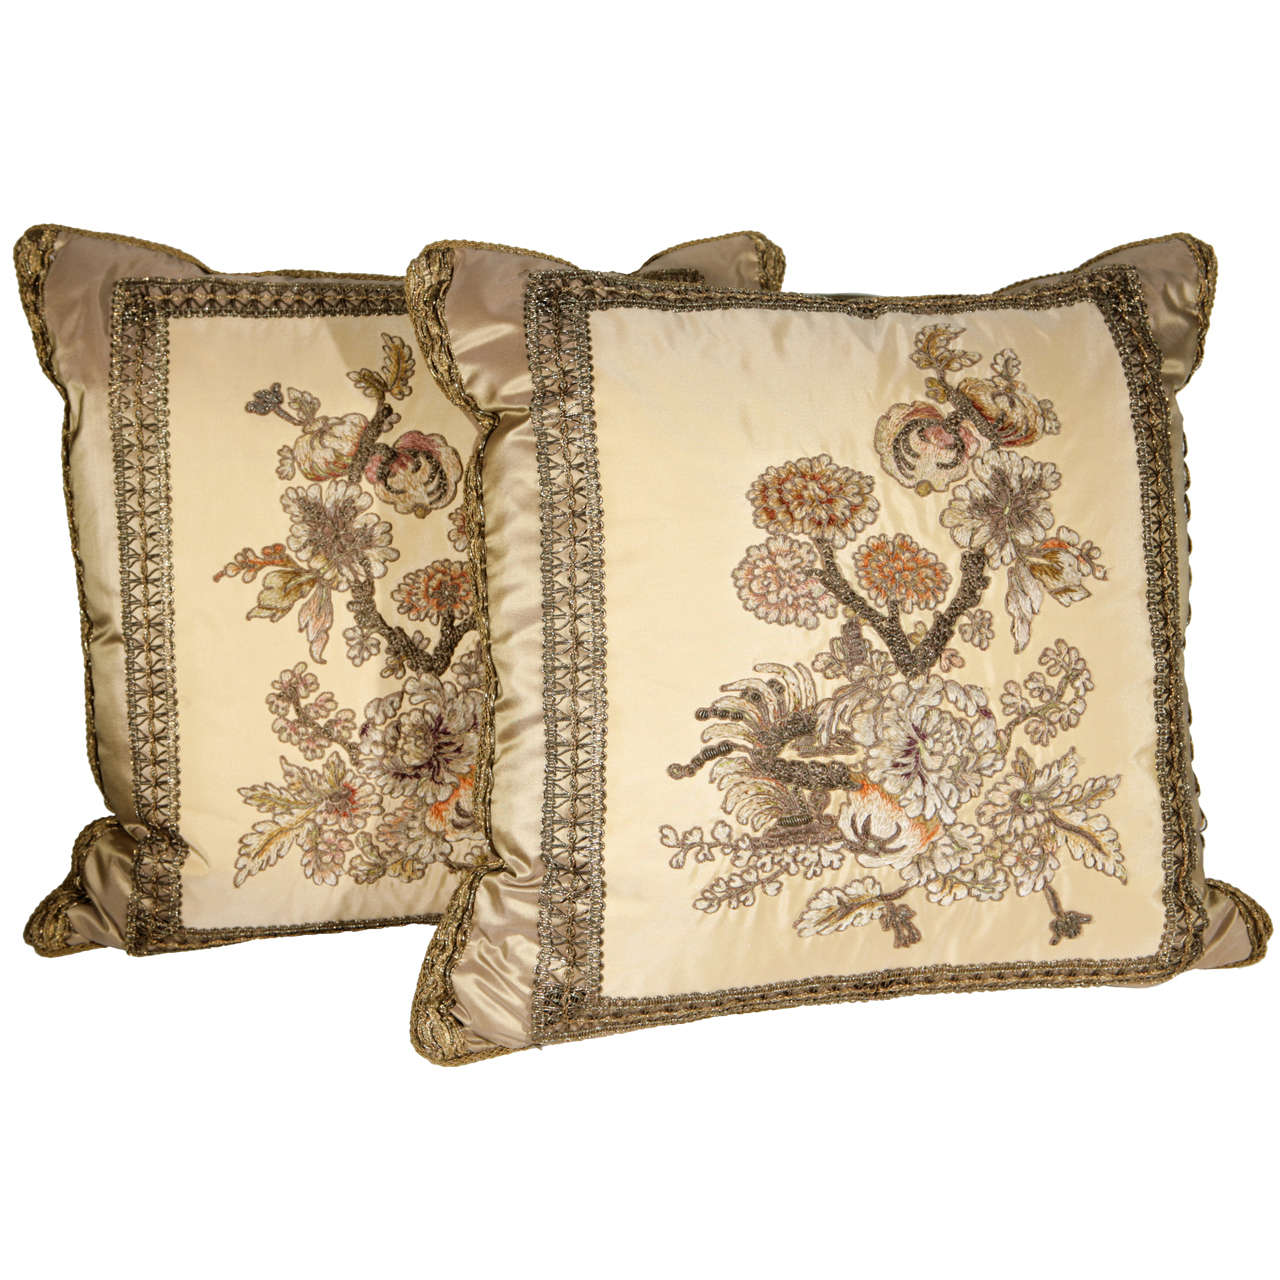 Pair of 19th Century French Fragment Pillows